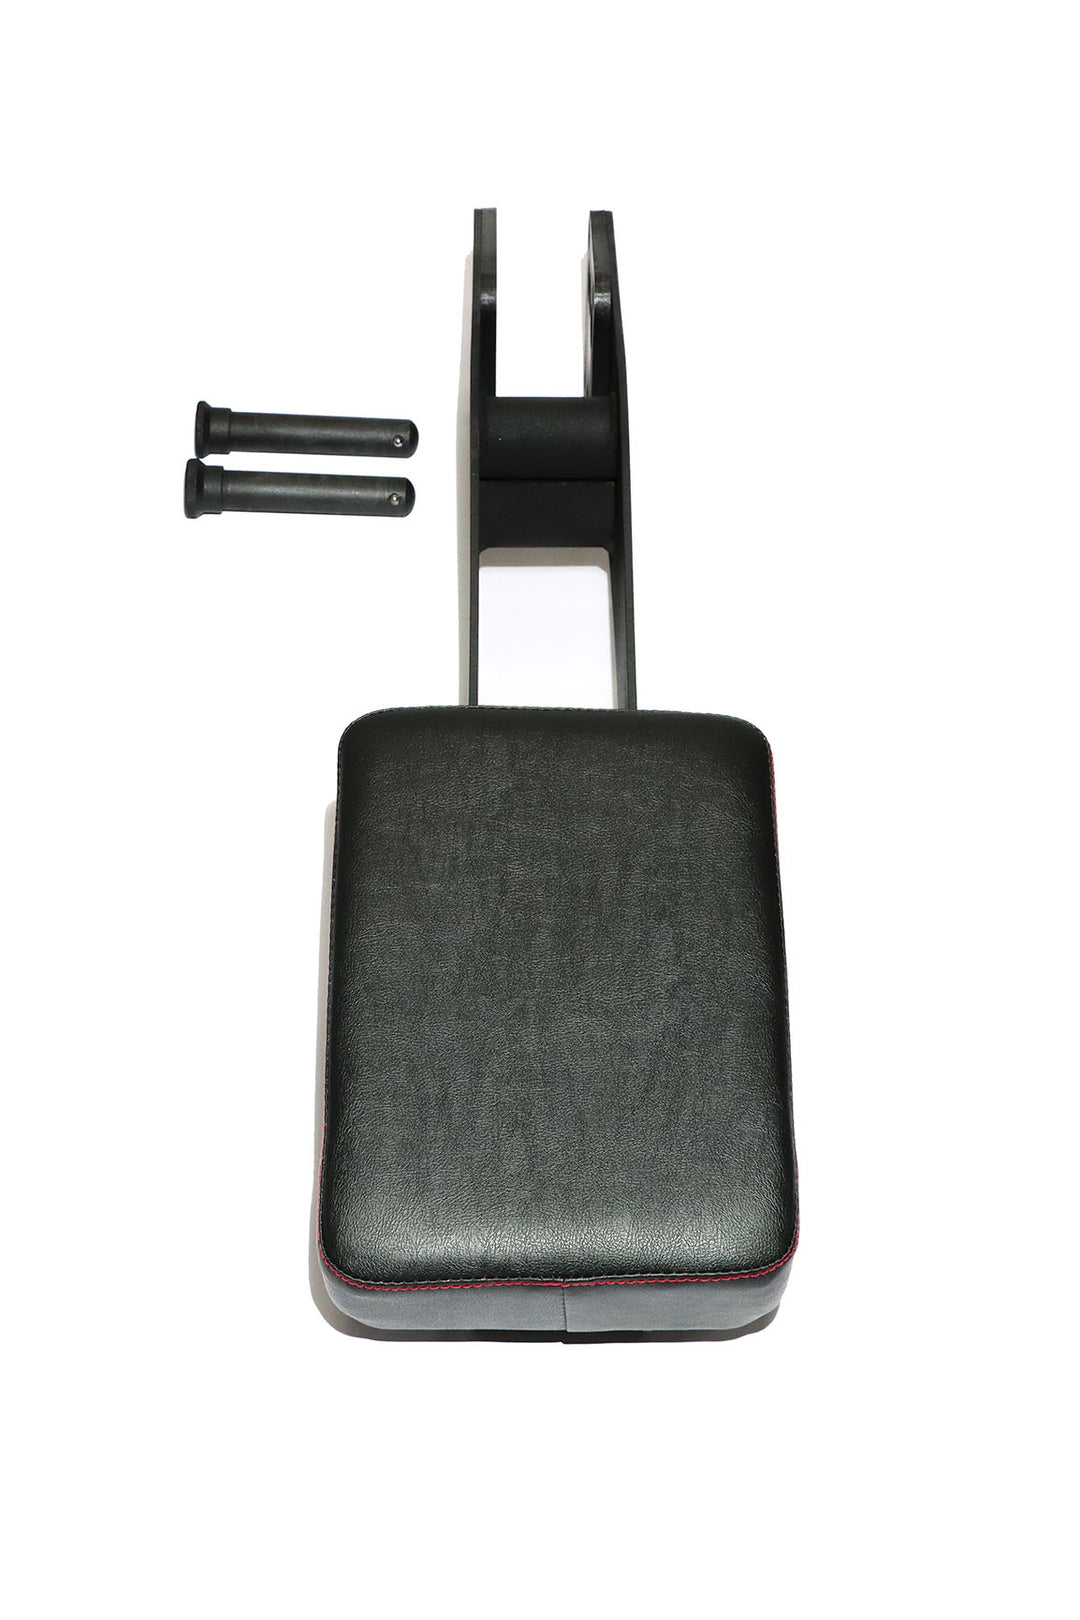 Body Iron Fly Pad Attachment 